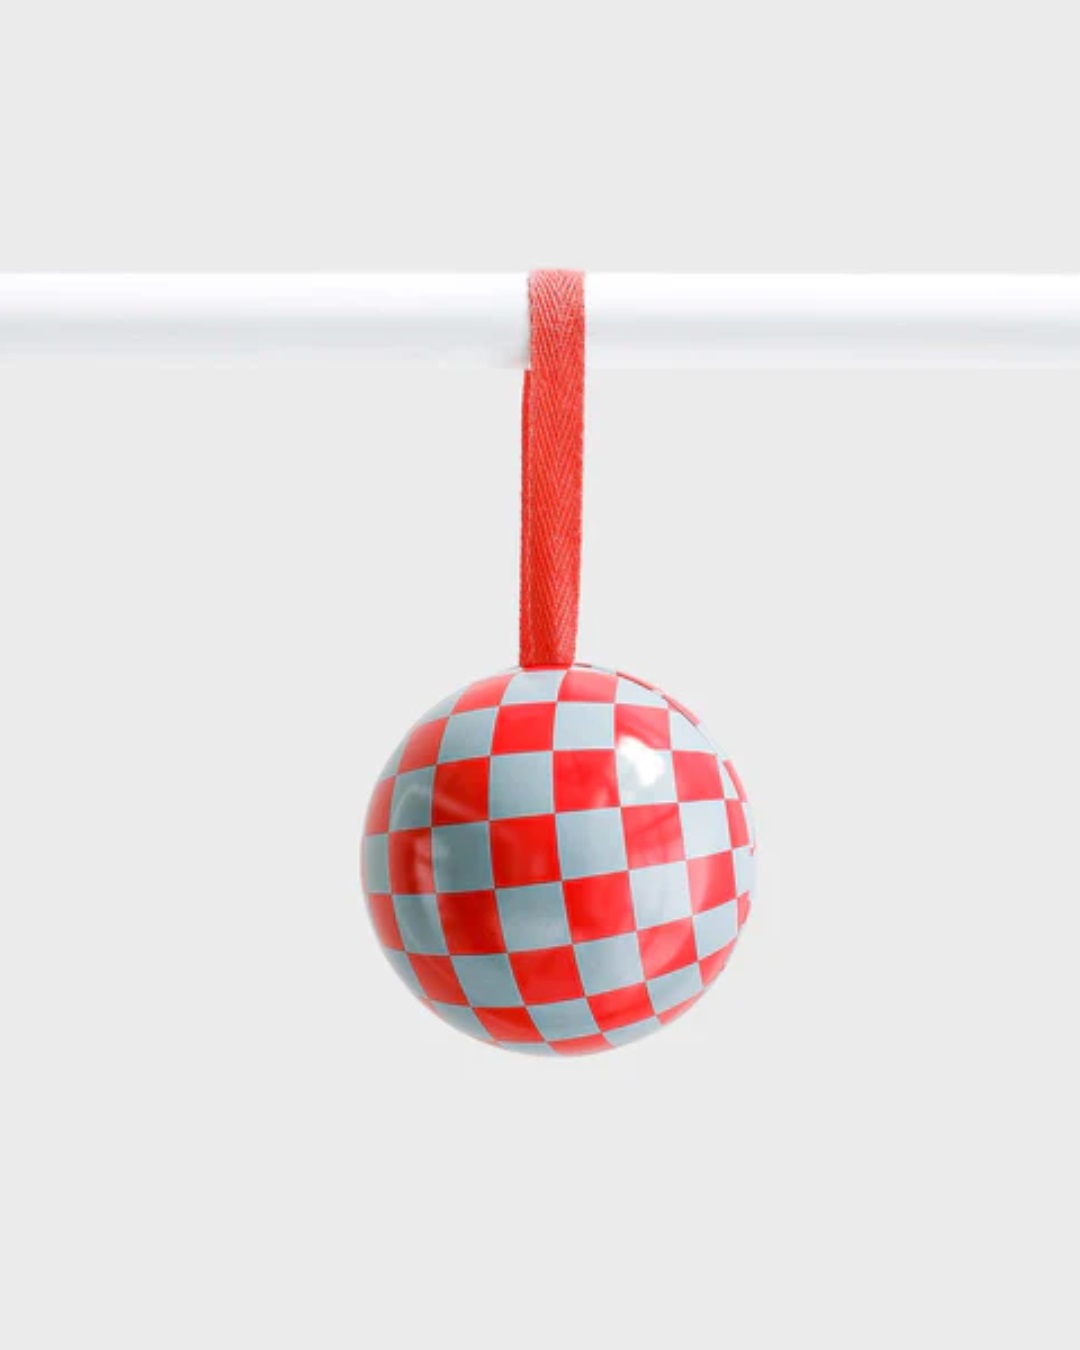 Bauble red and blue checked hanging on pole